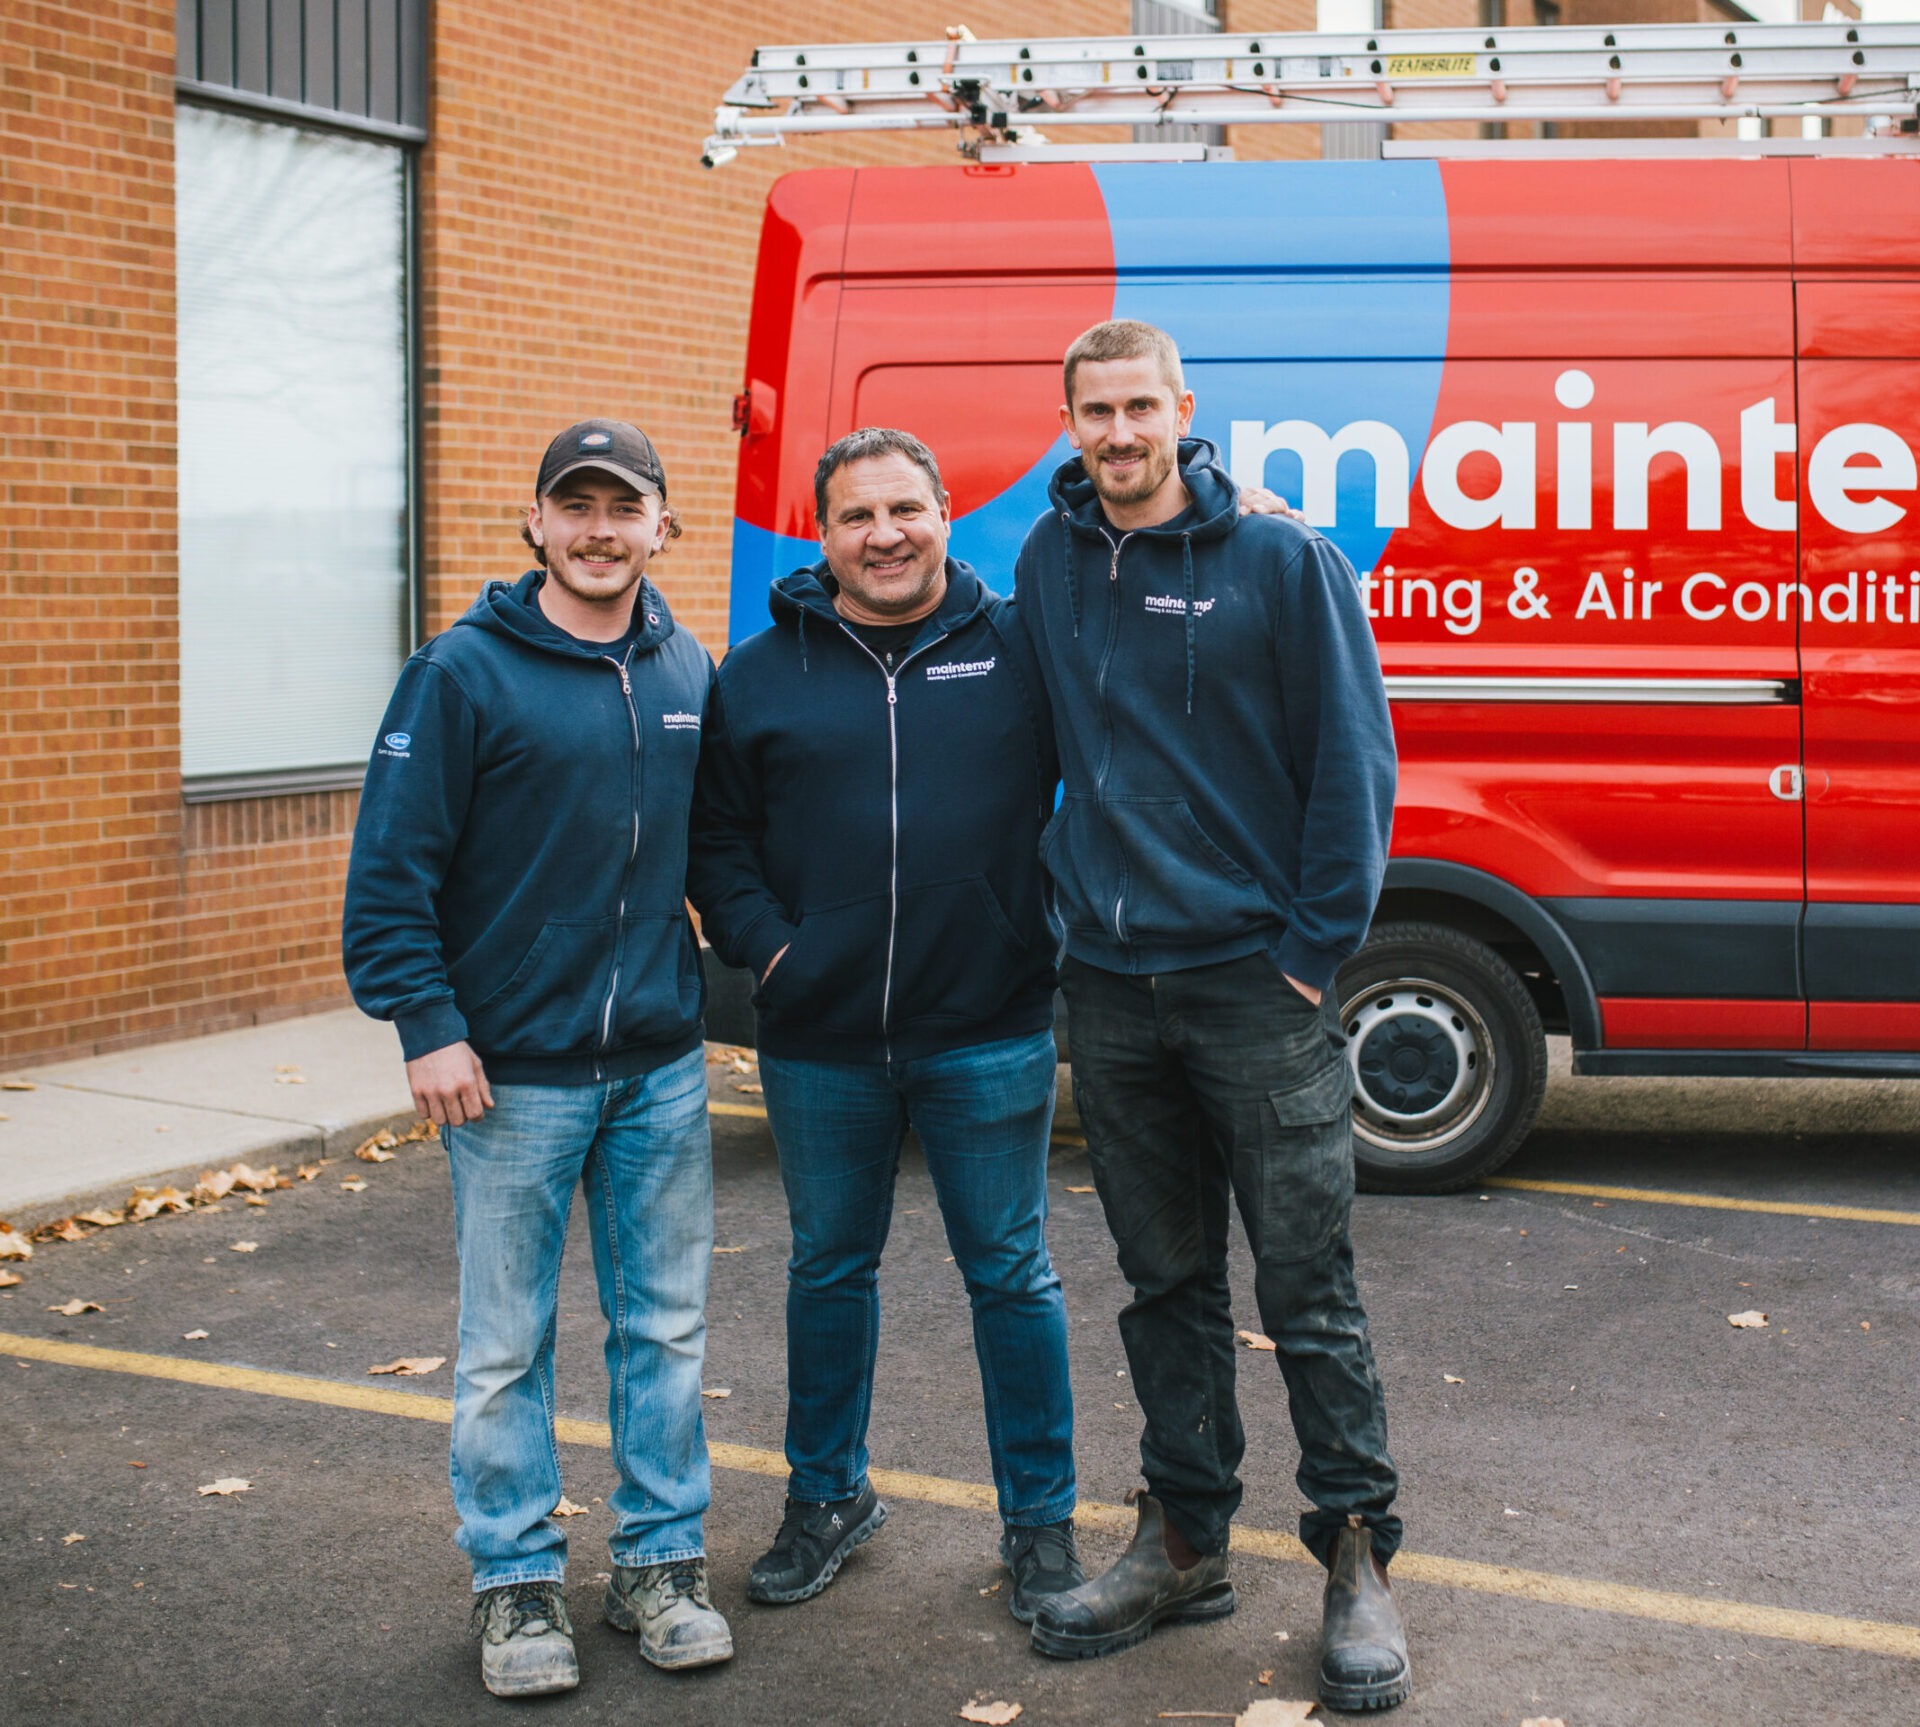 Three people in matching company jackets stand smiling in front of a red service van with "maintenance" text, suggesting they work in HVAC services.